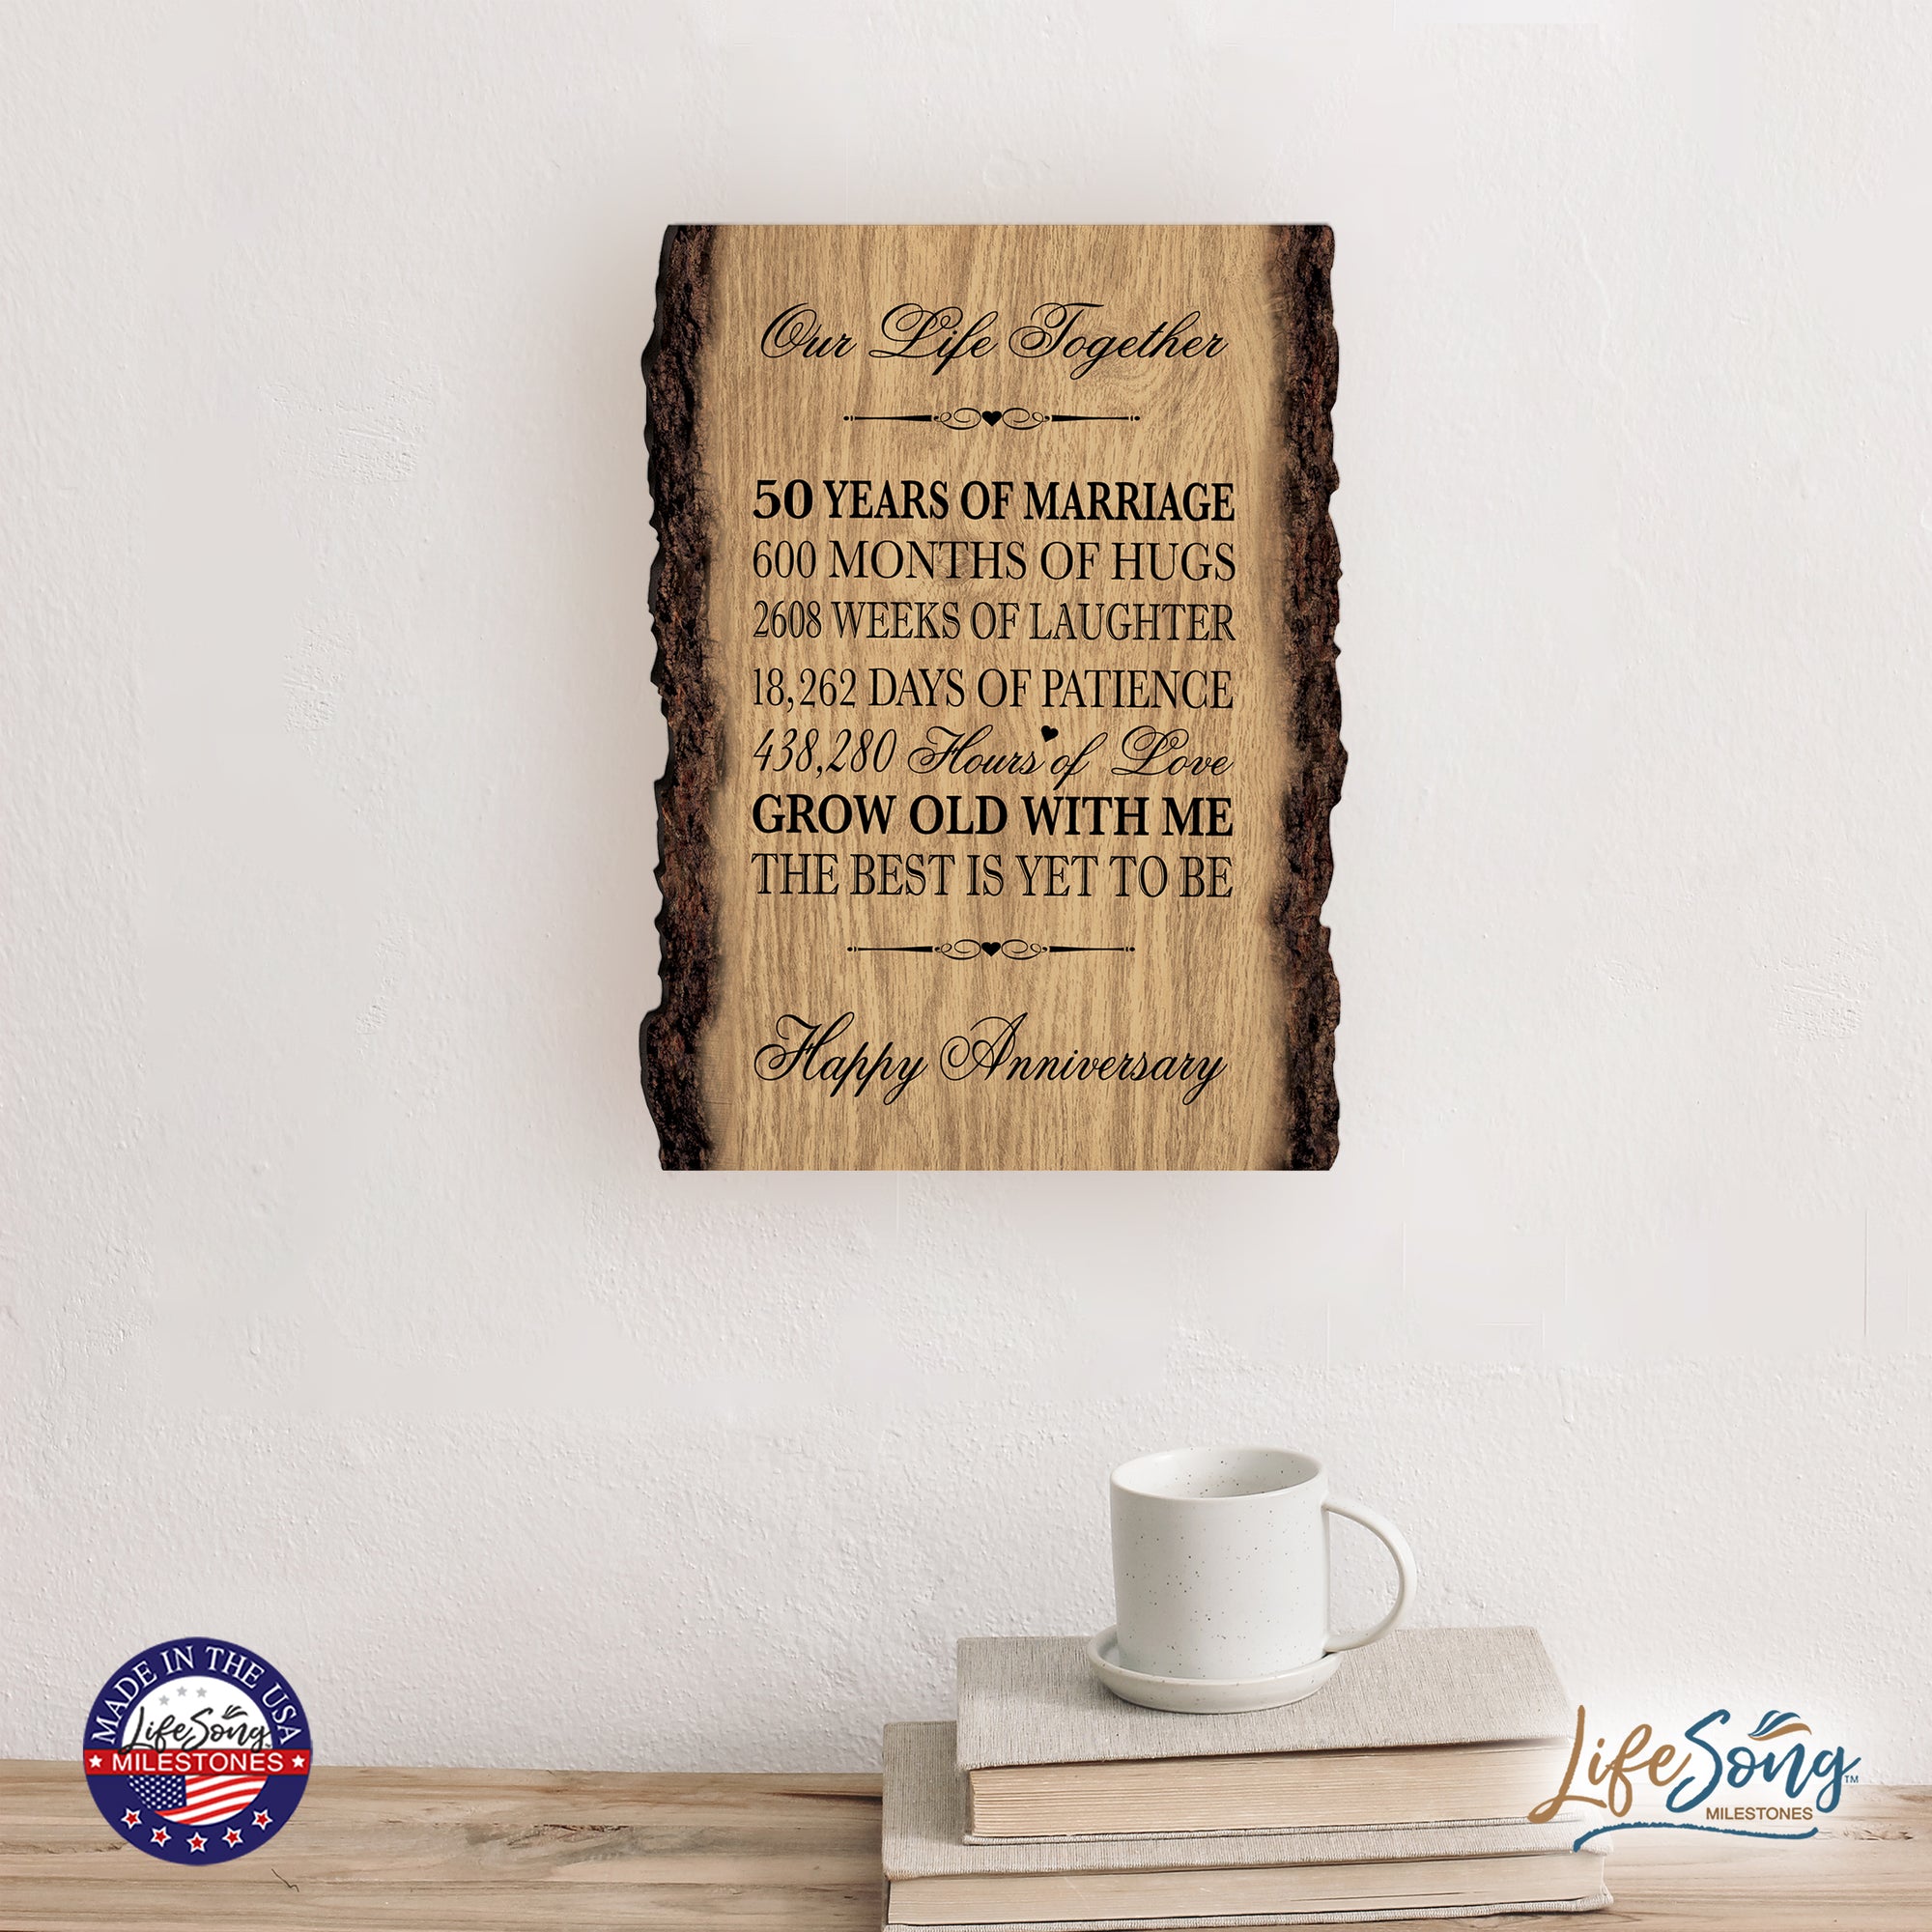 Rustic Wedding Anniversary 9x12 Barky Wall Plaque Gift For Parents, Grandparents New Couple - 50 Years Of Marriage